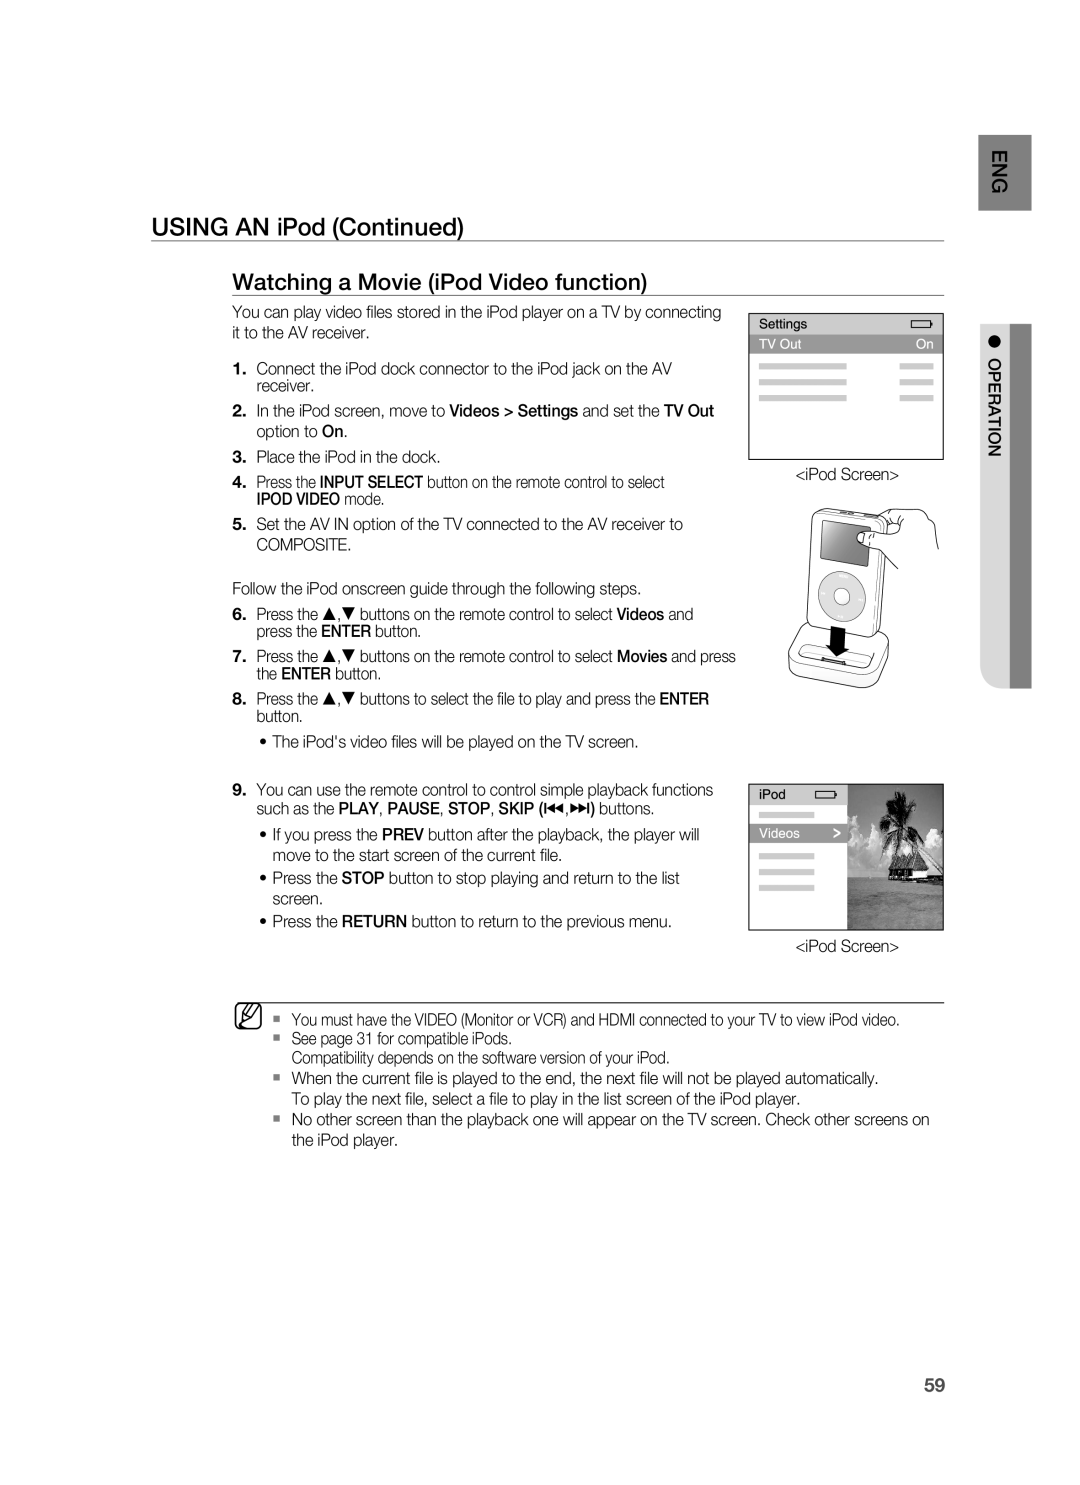 Samsung HW-C900-XAA user manual USING AN iPod Continued, Watching a Movie iPod Video function 